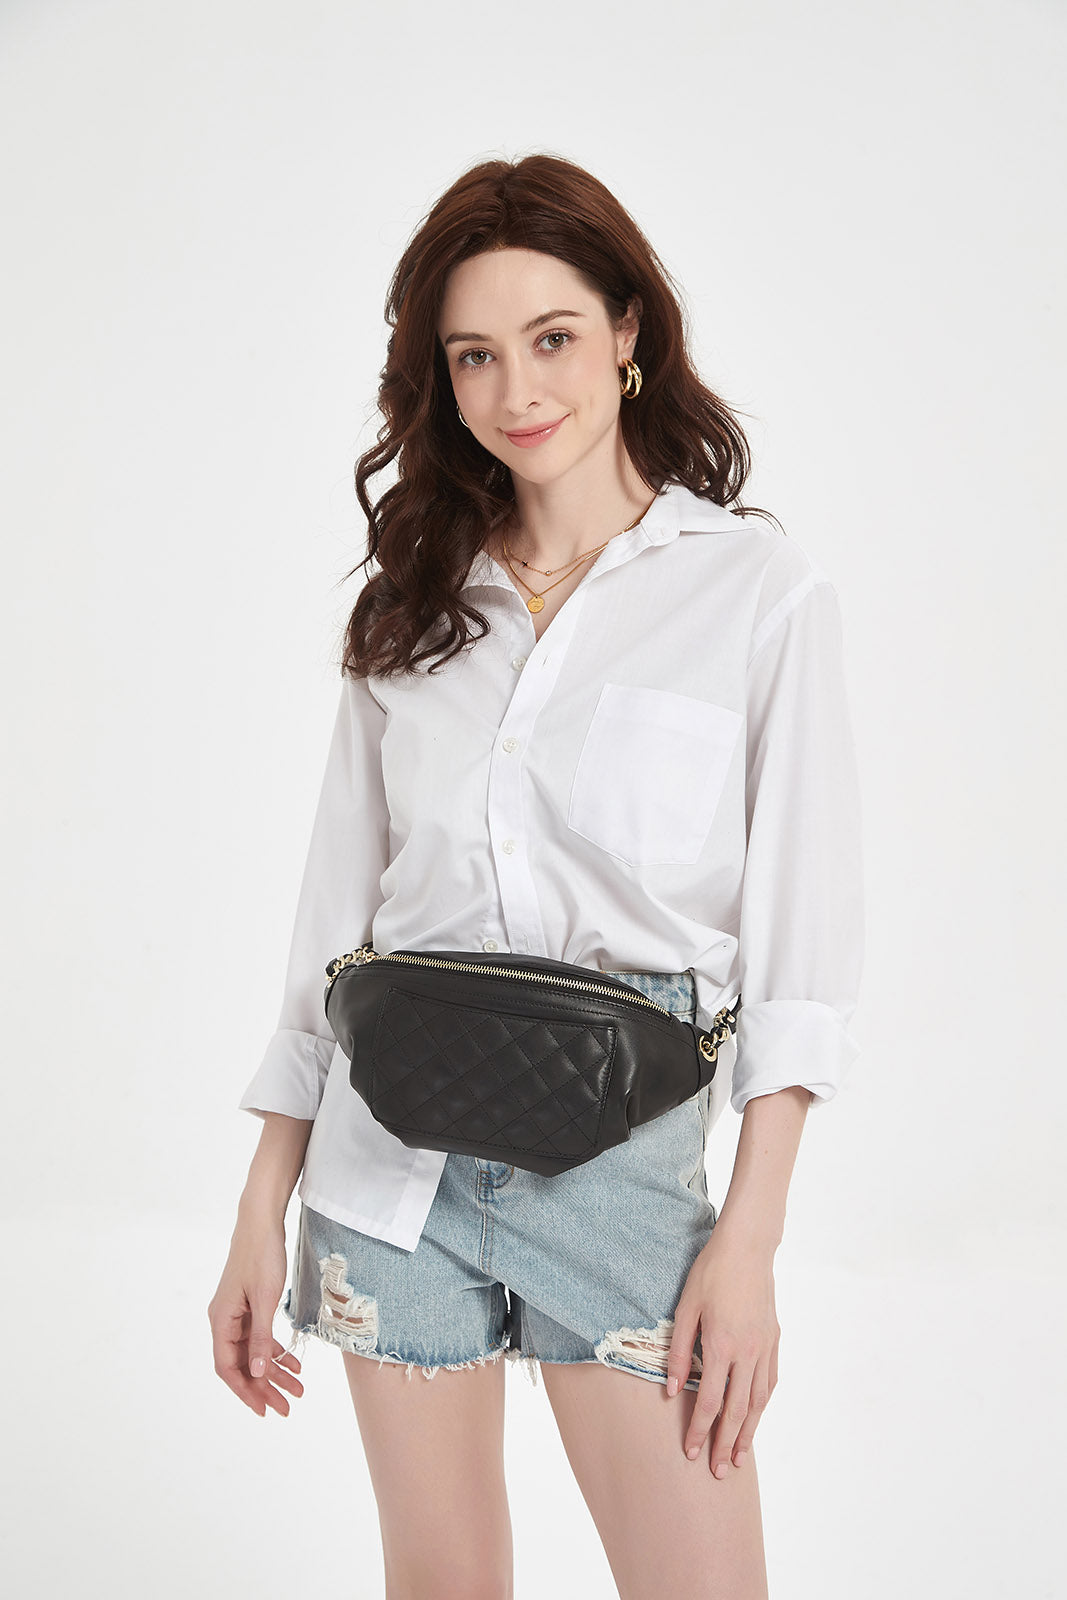 HIMODA quilted fanny pack - black leather - details 4